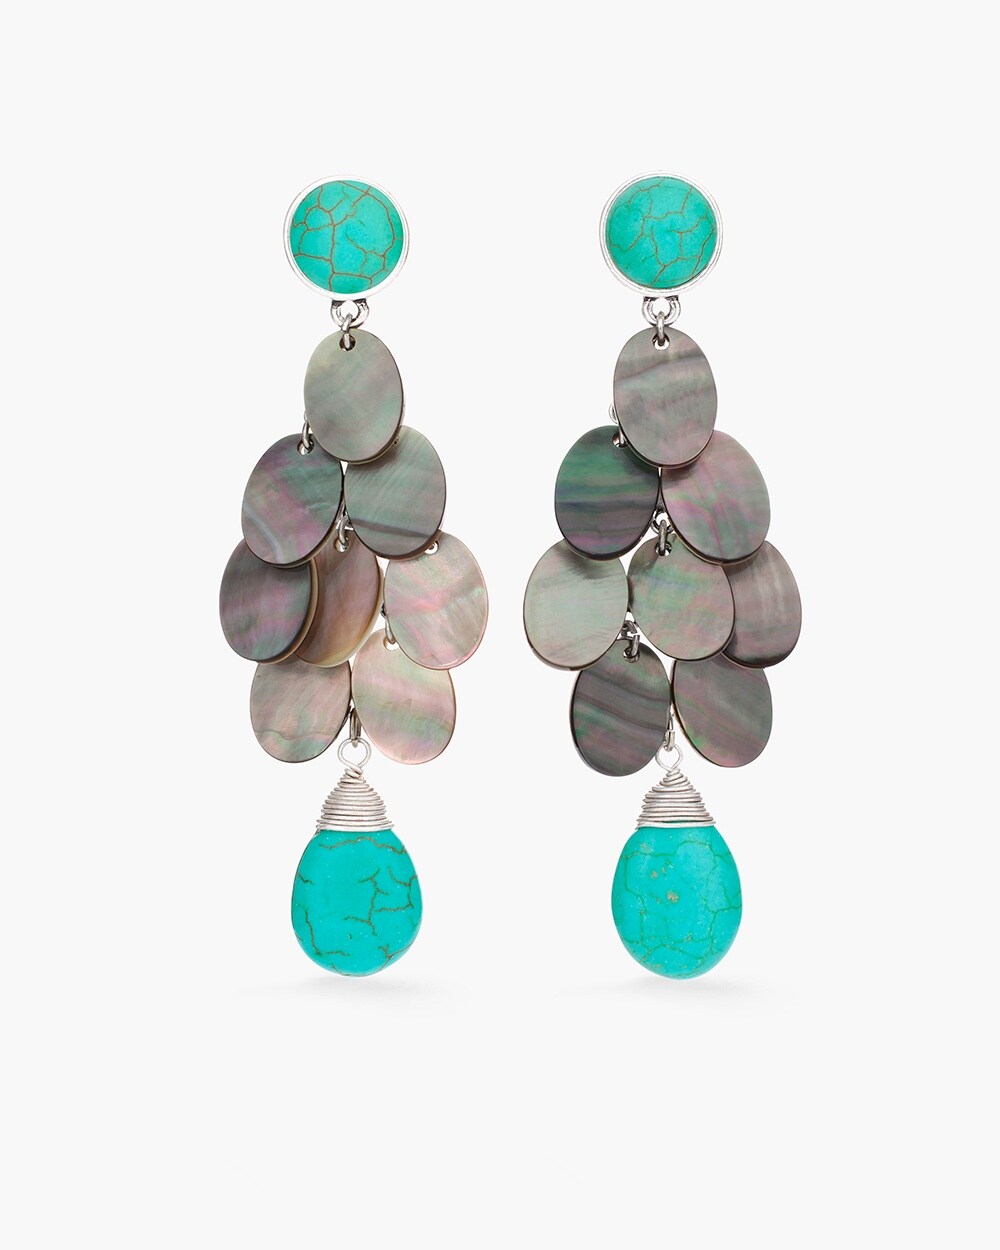 Turquoise and Neutral Drop Earrings